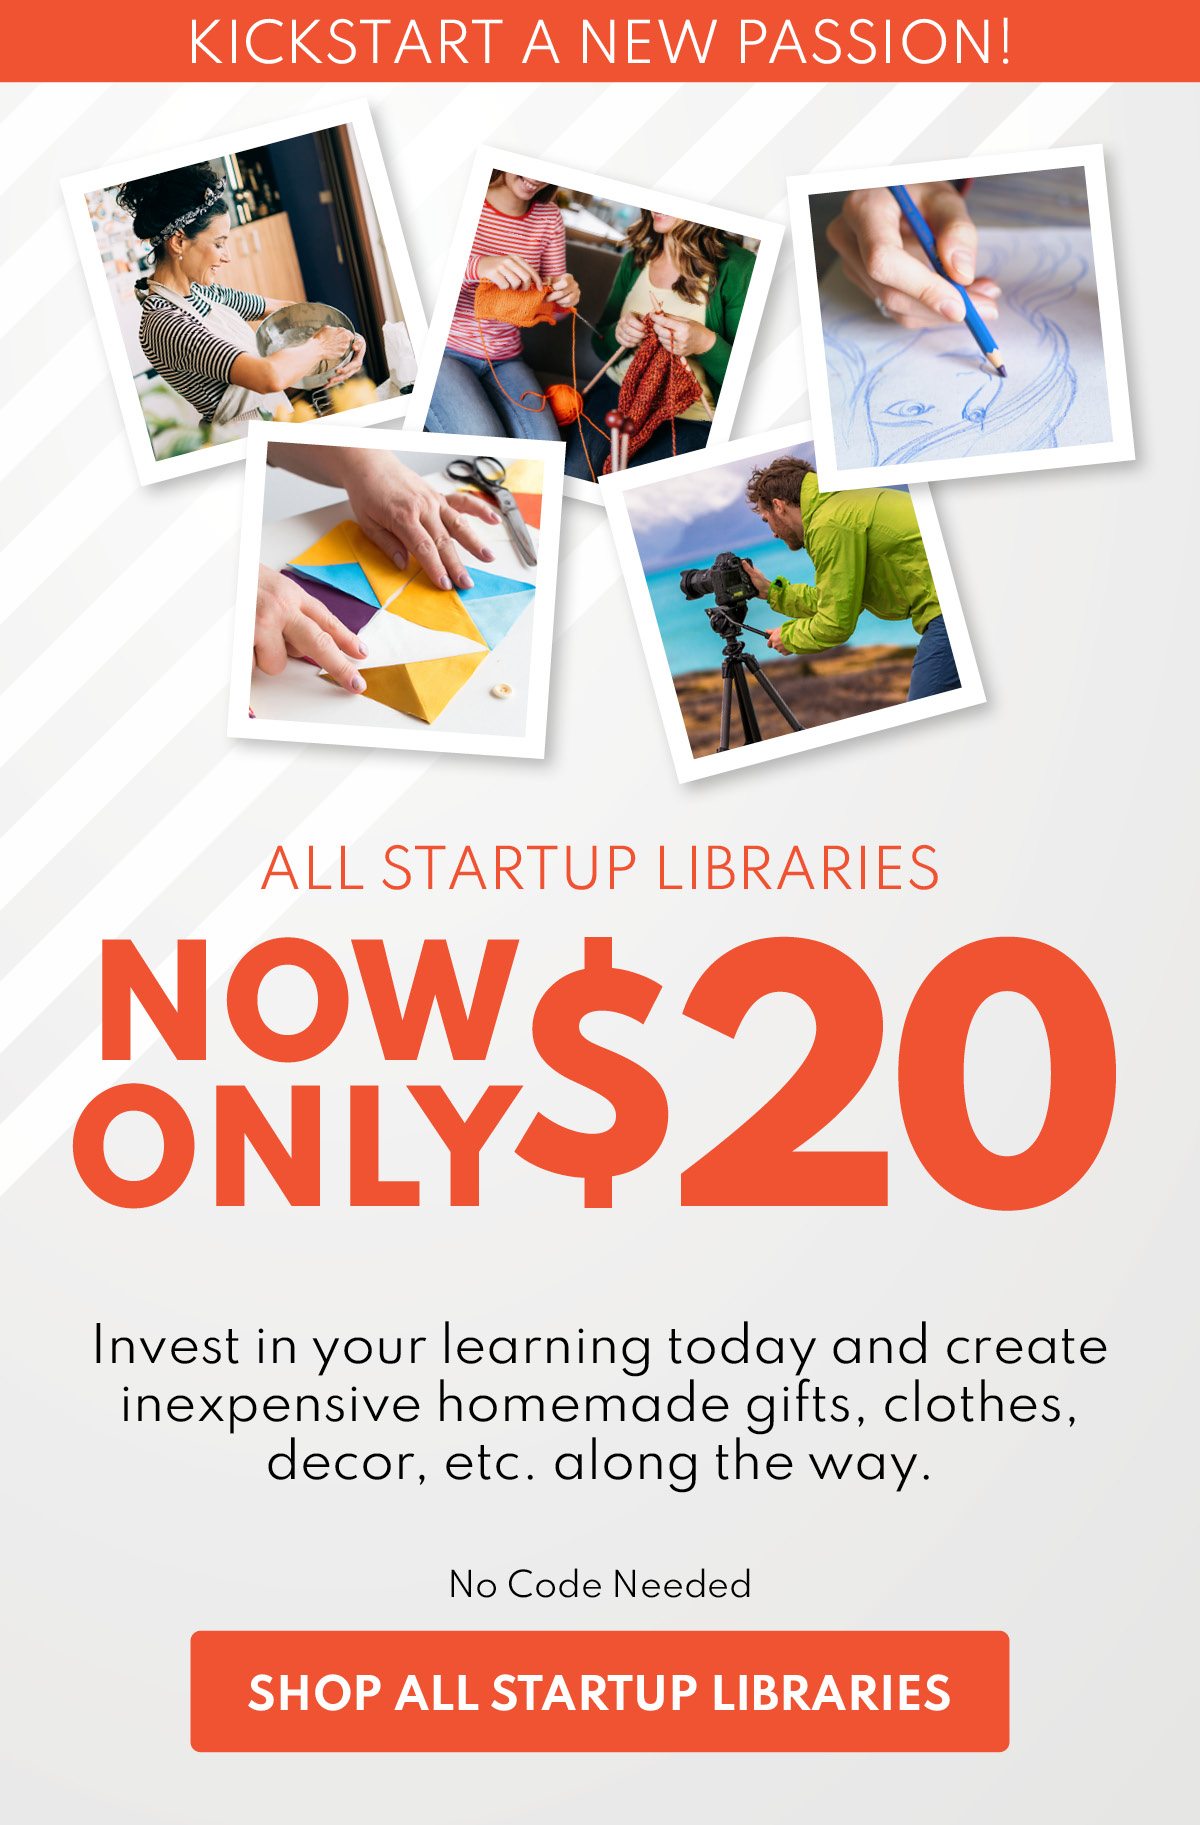 Kickstart a new passion! All Startup Libraries Now Only $20 Invest in your learning today and create inexpensive homemade gifts, clothes, decor, etc. along the way. No Code Needed